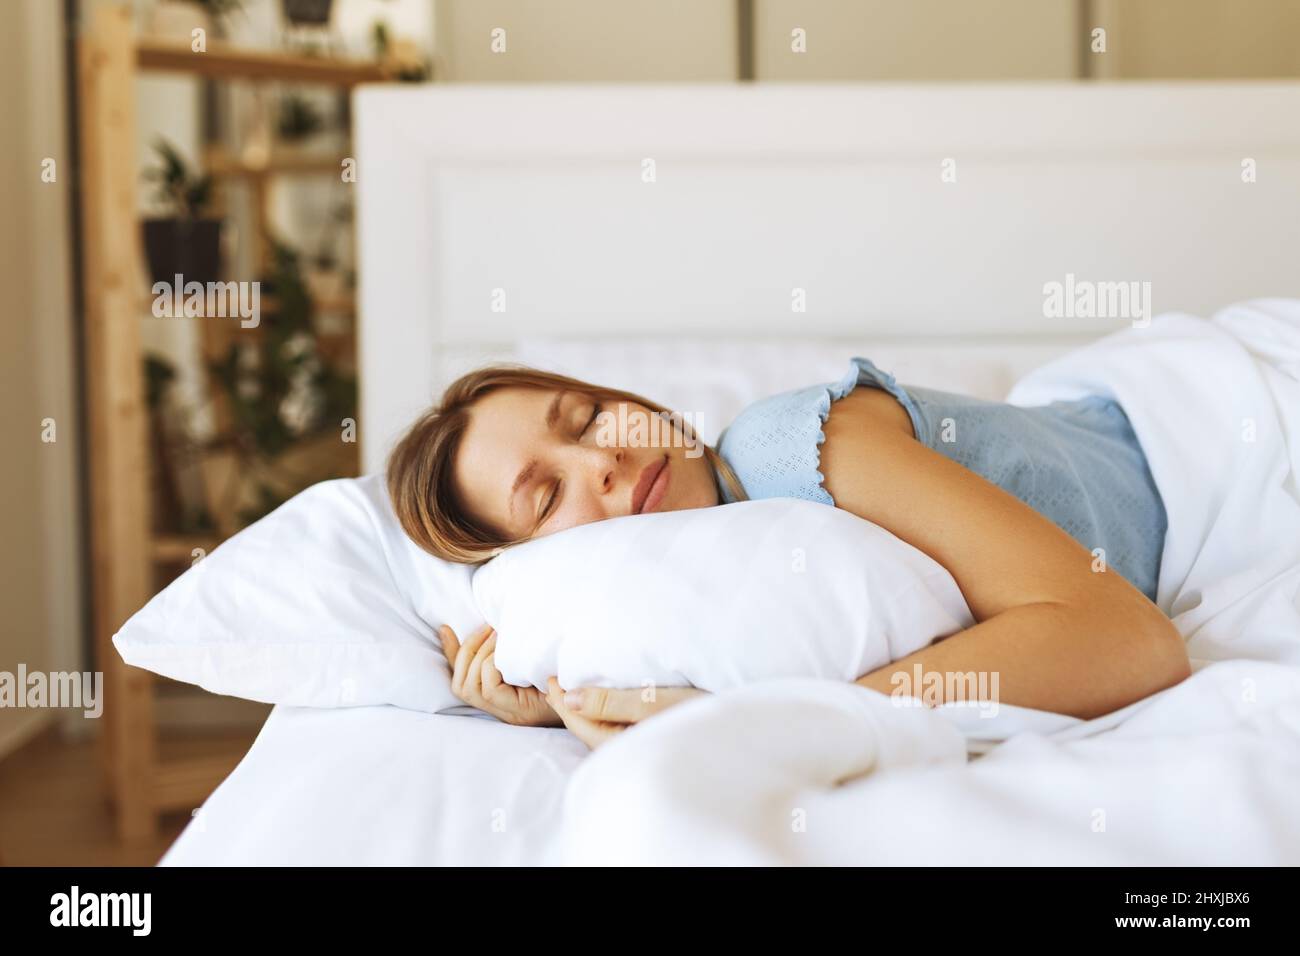 Portrait of young woman enjoying sleeping time in bed , close up ,elevated view, hugging pillow. Stock Photo